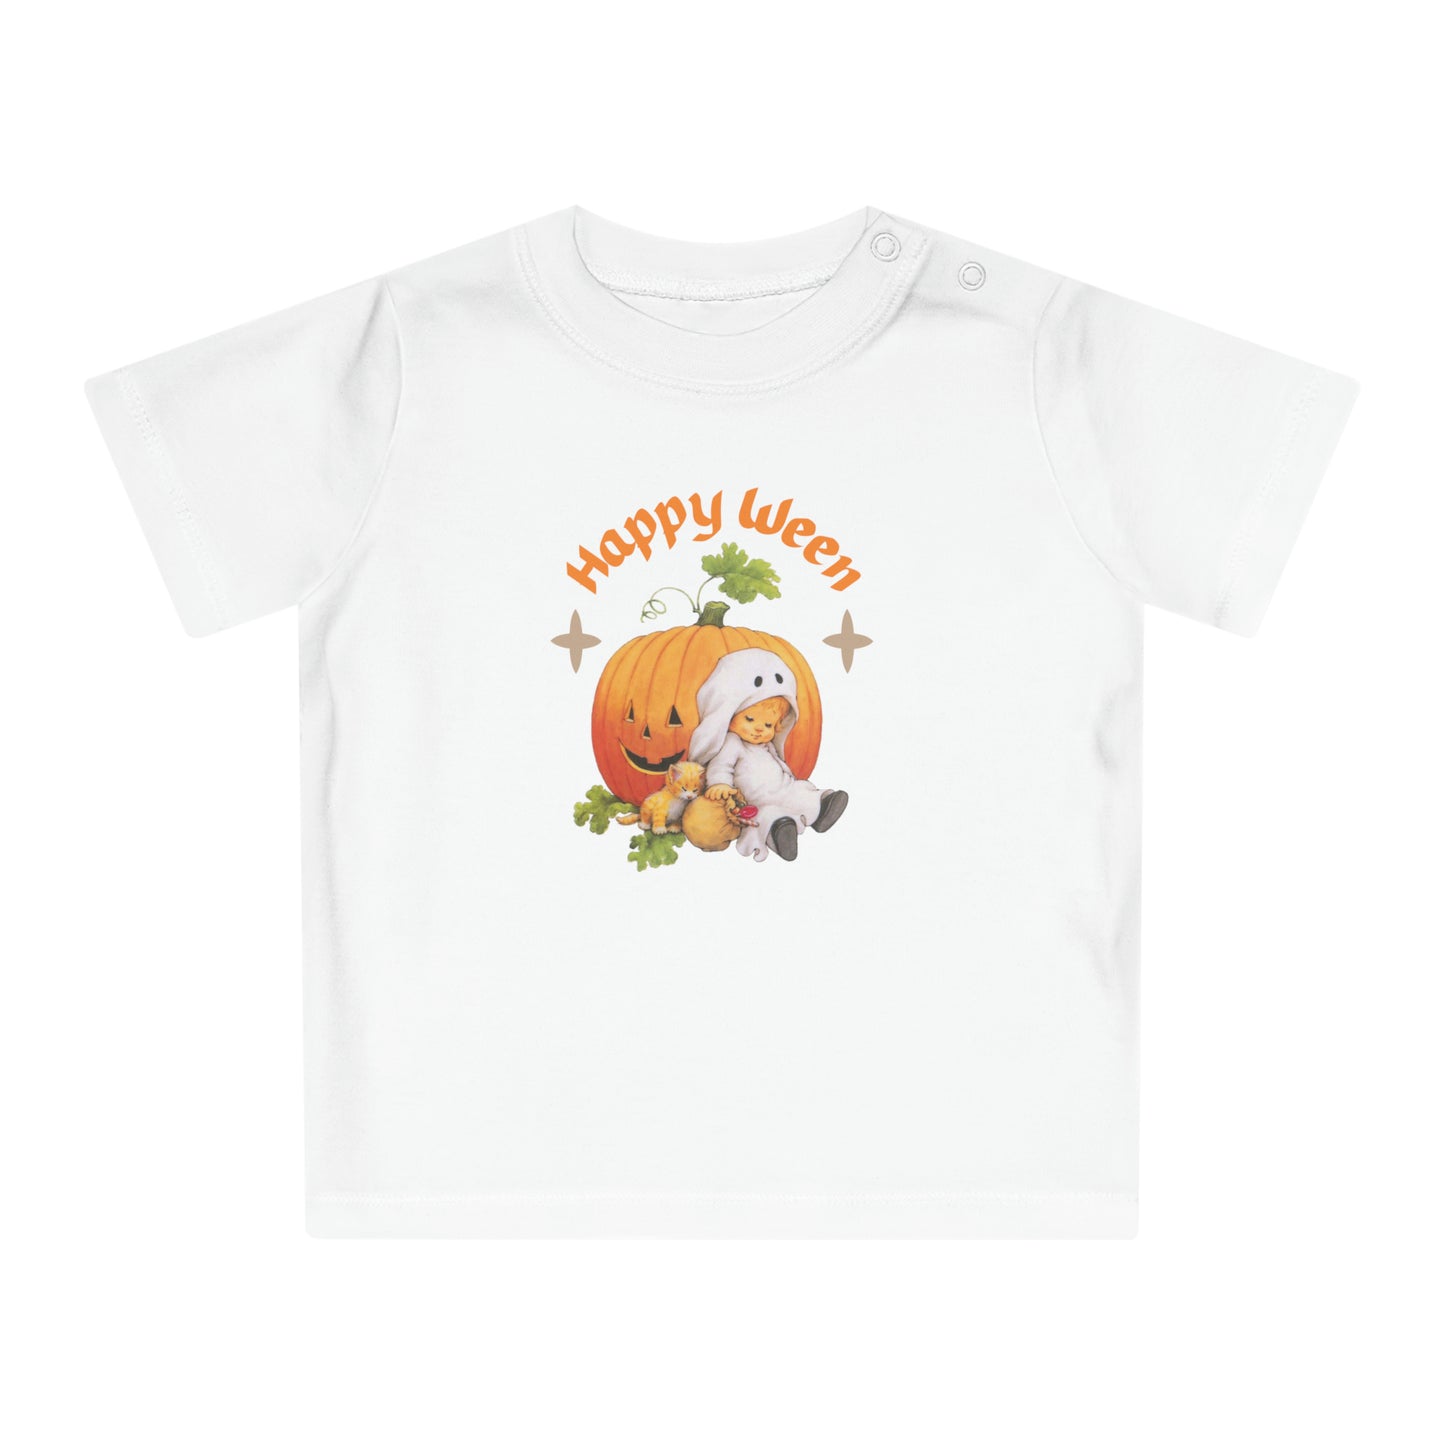 "Happy Holidays Extravaganza: Ween Baby T-Shirt Collection - Unwrap Joy and Style for Your Little One!"